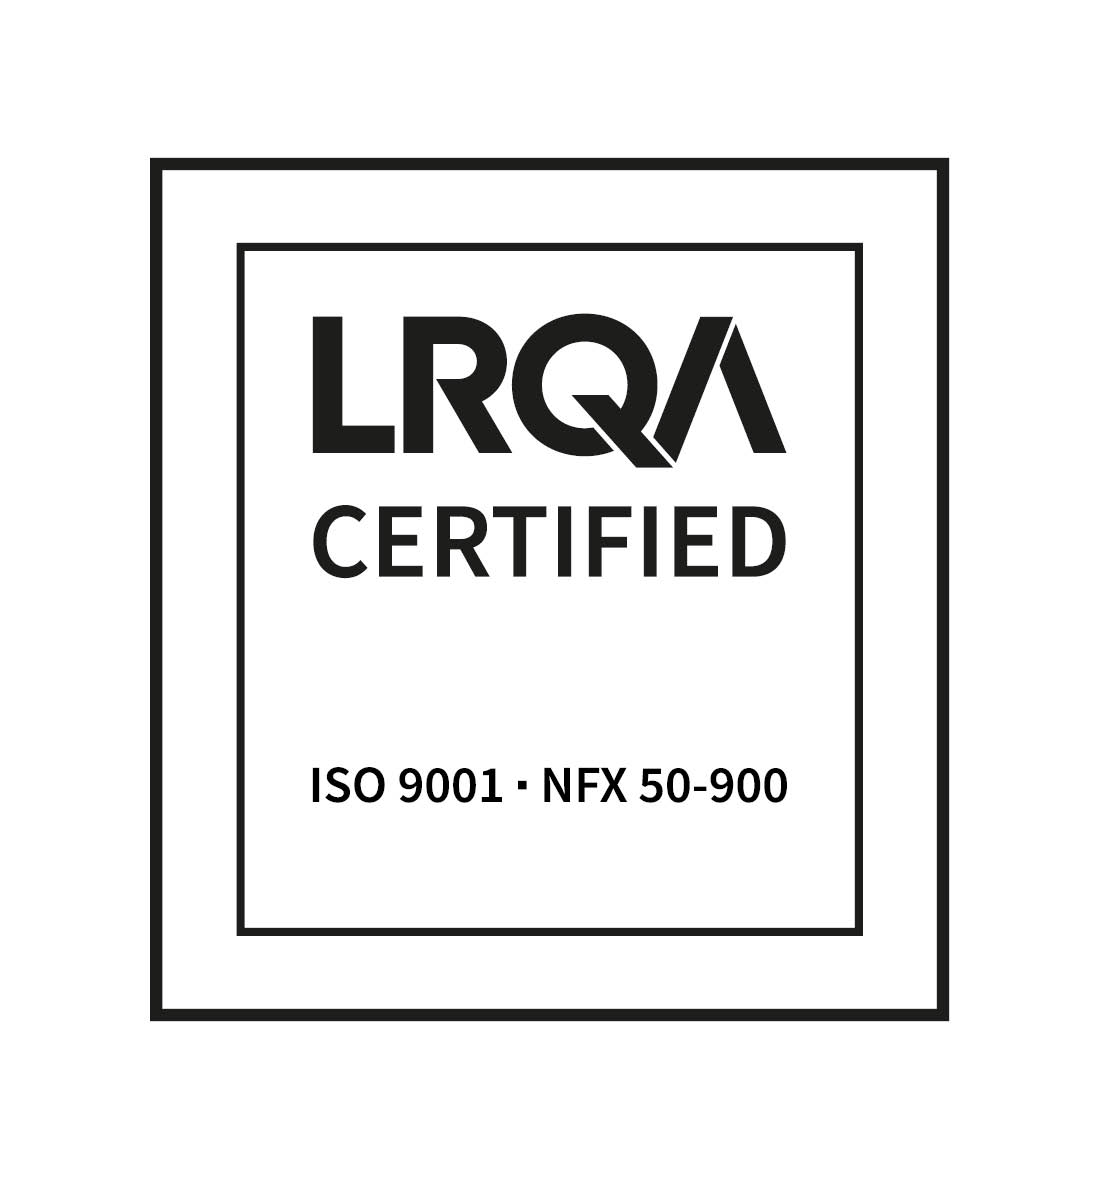 MicroPICell doublement certifiée ISO9001 - NFX 50-900